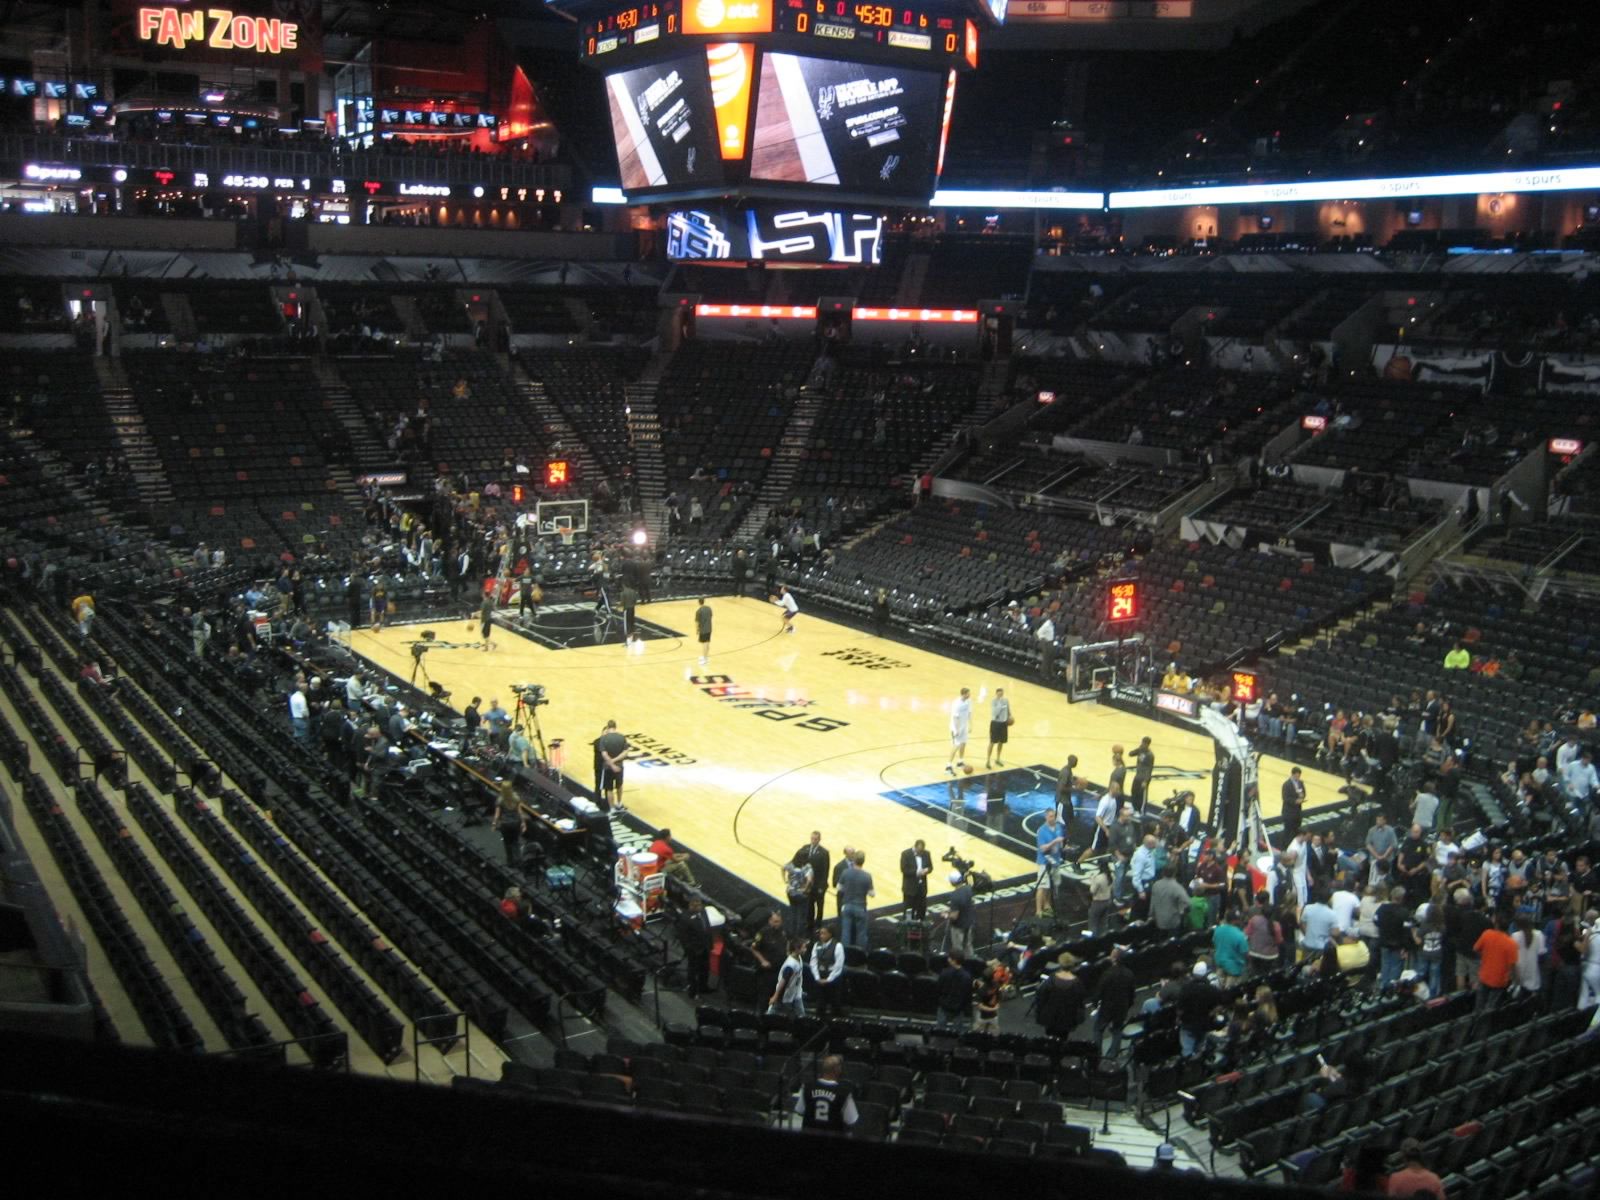 section 103, row 29 seat view  for basketball - at&t center